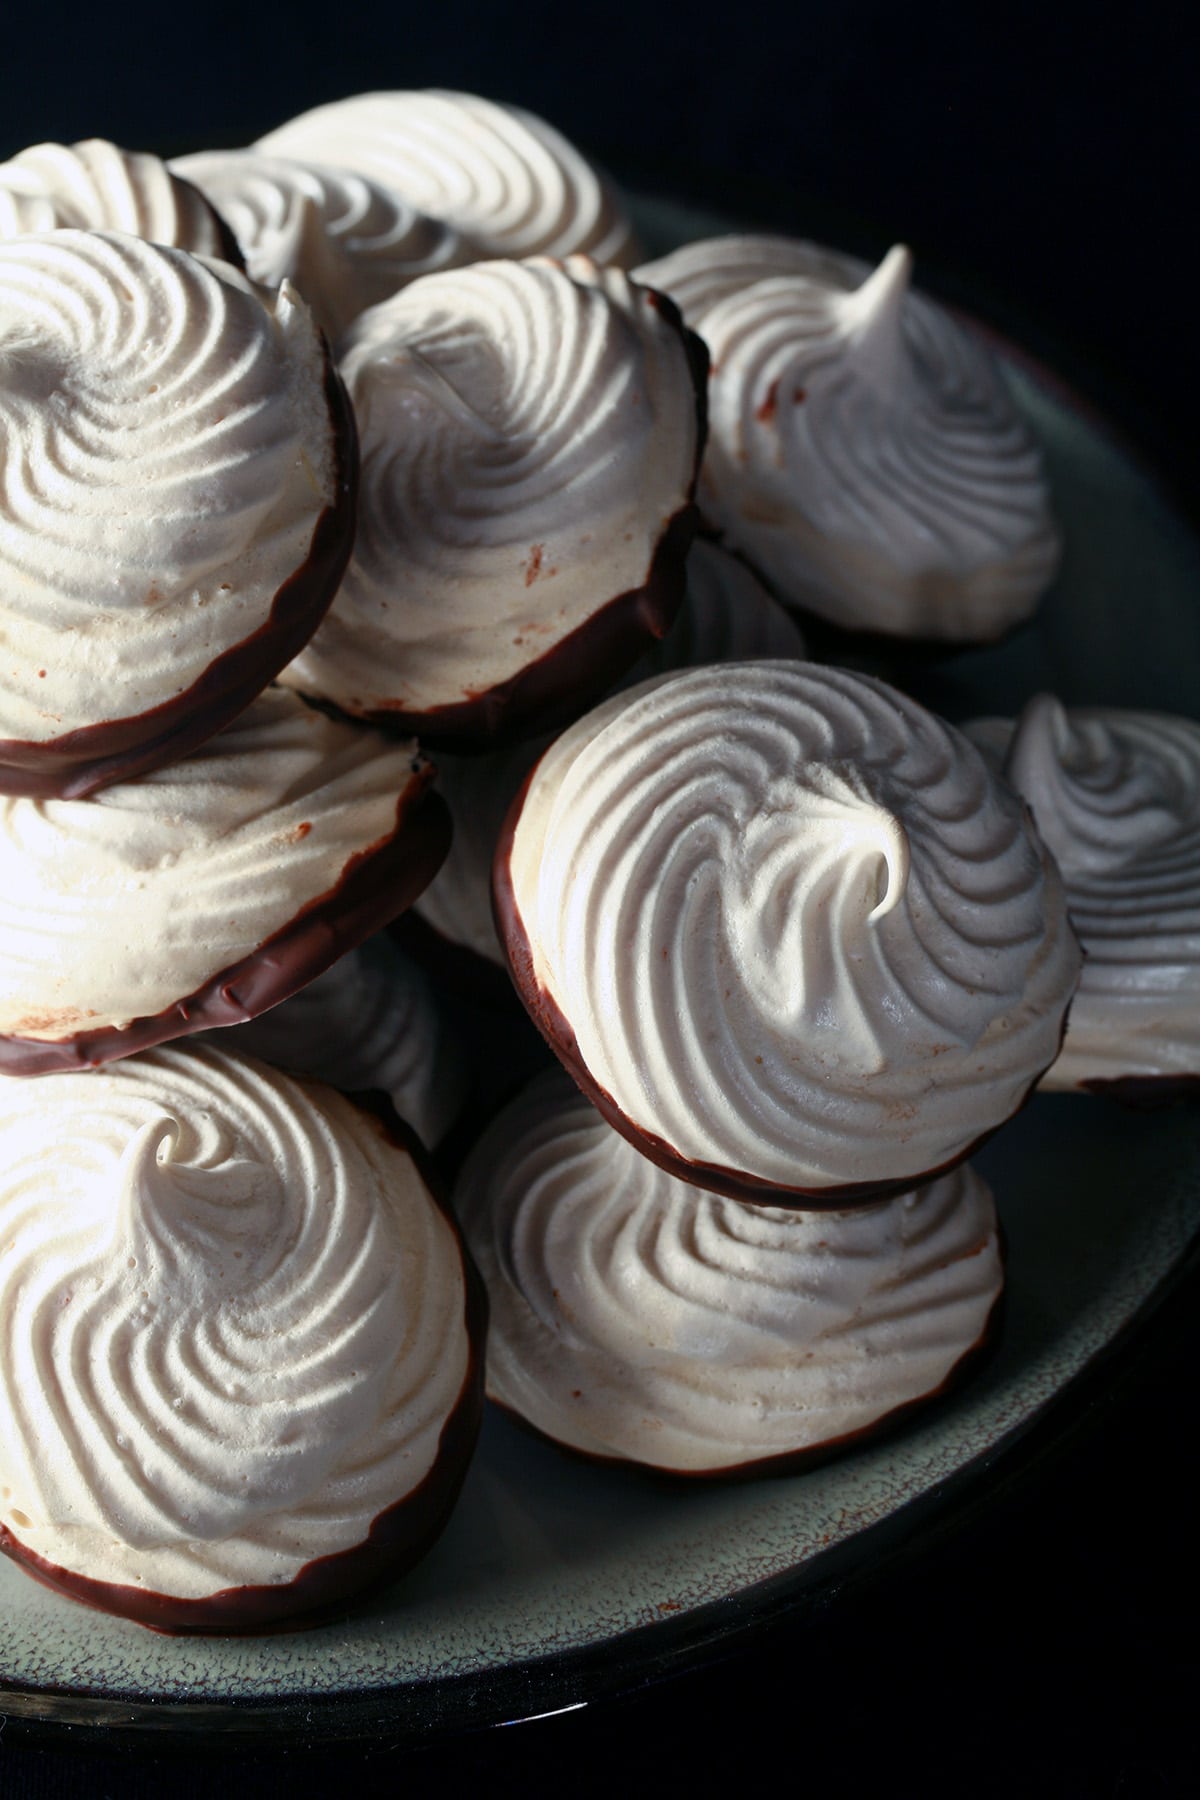 A plate piled high with swirl shaped malted milk meringue cookies. The bottom of each one is coated in chocolate.